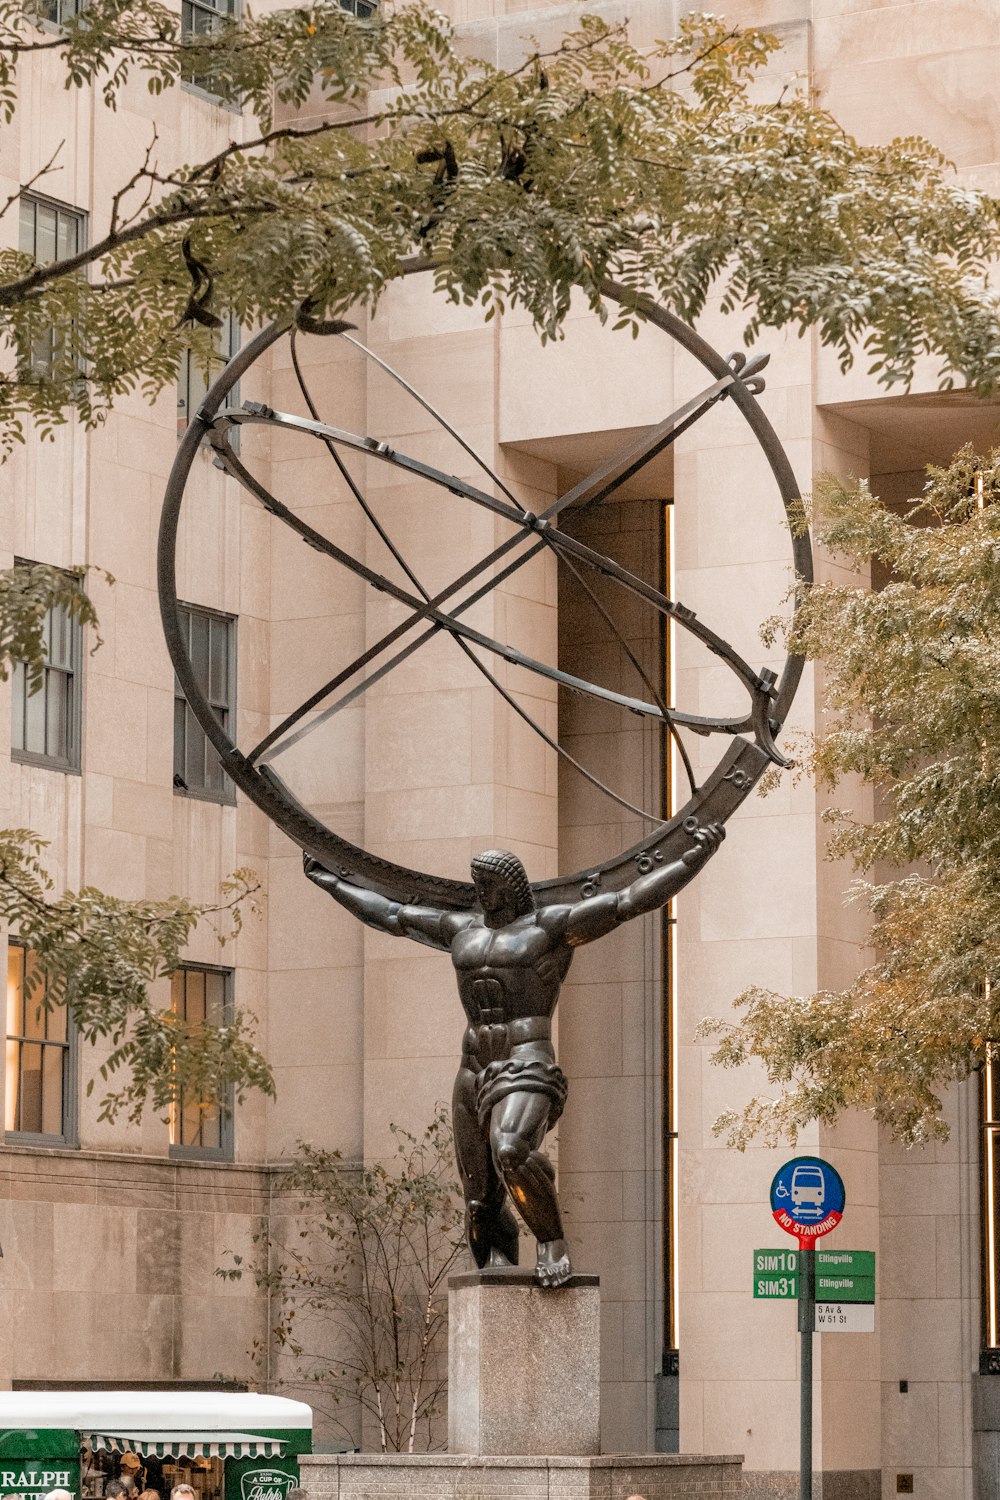 a statue of a man holding a large circular object